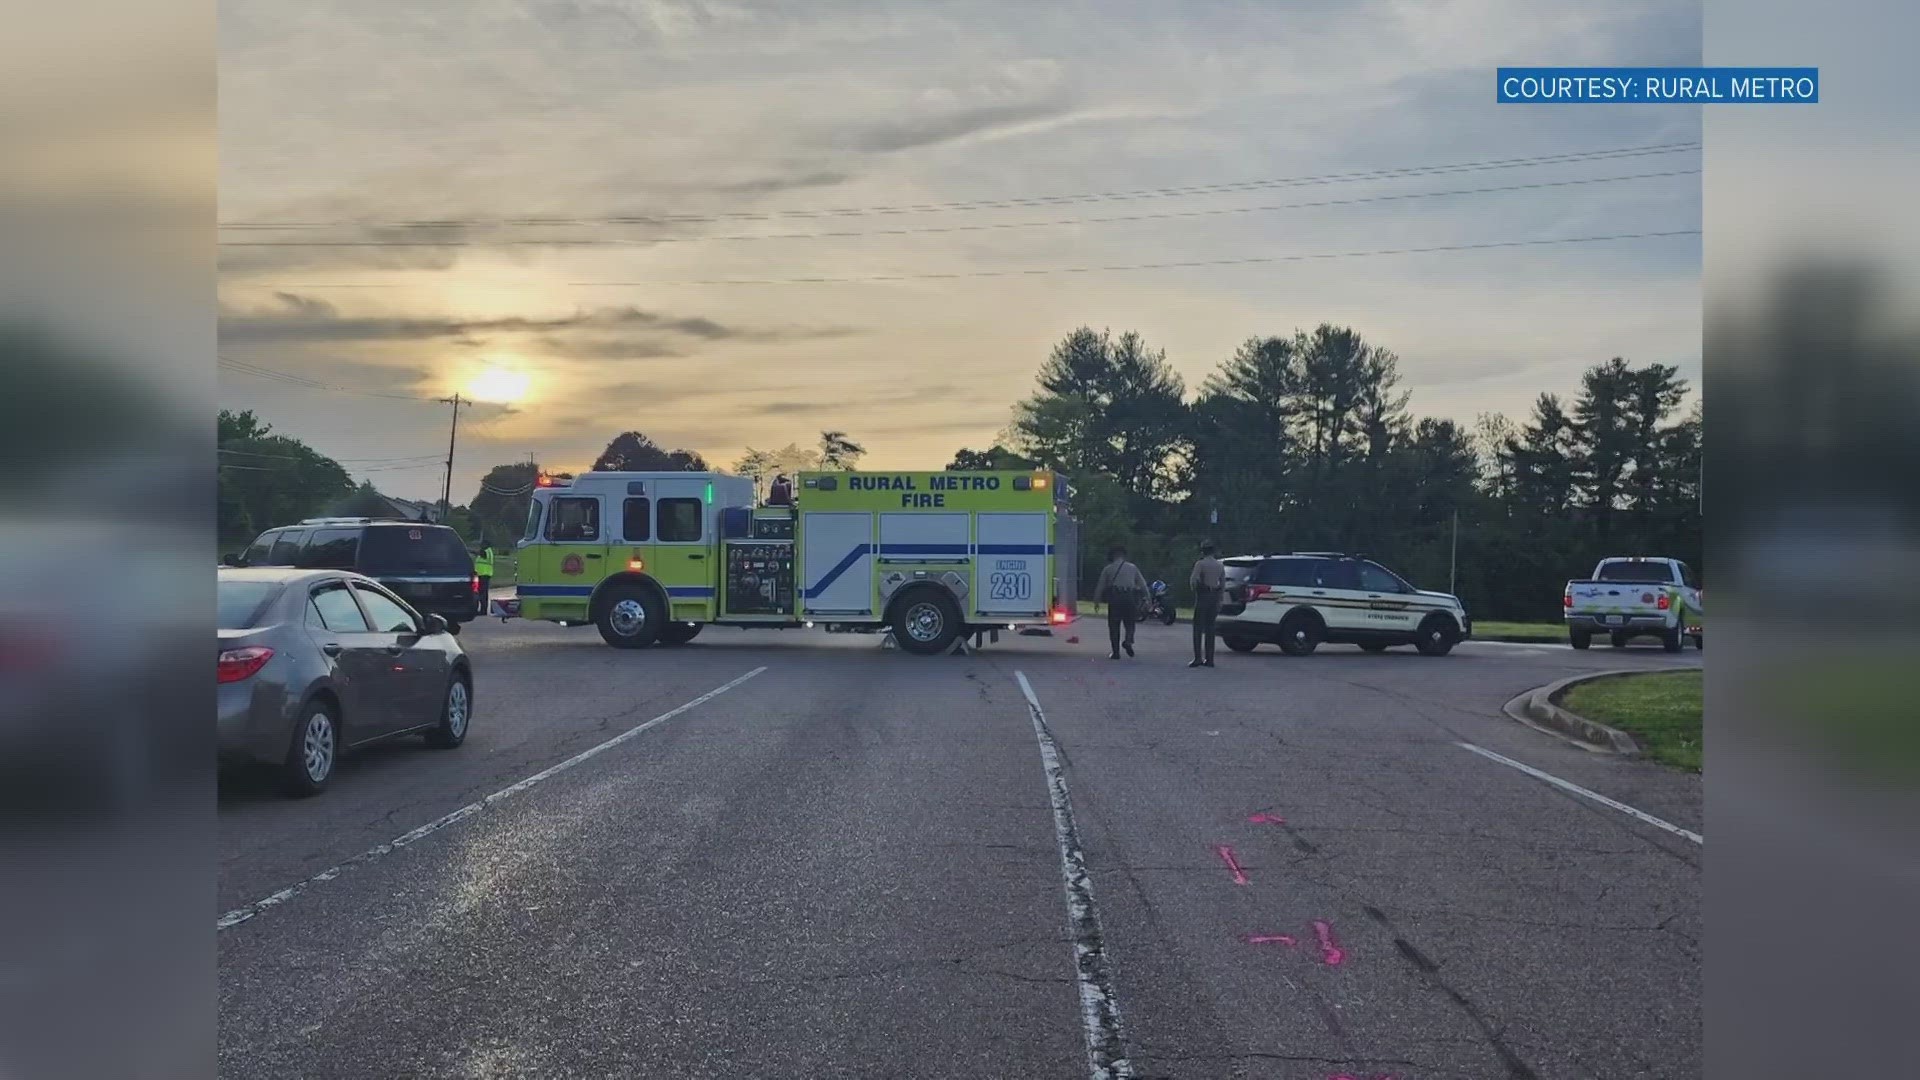 According to a release from Rural Metro, the crash happened near a Walmart at around 7:15 p.m.